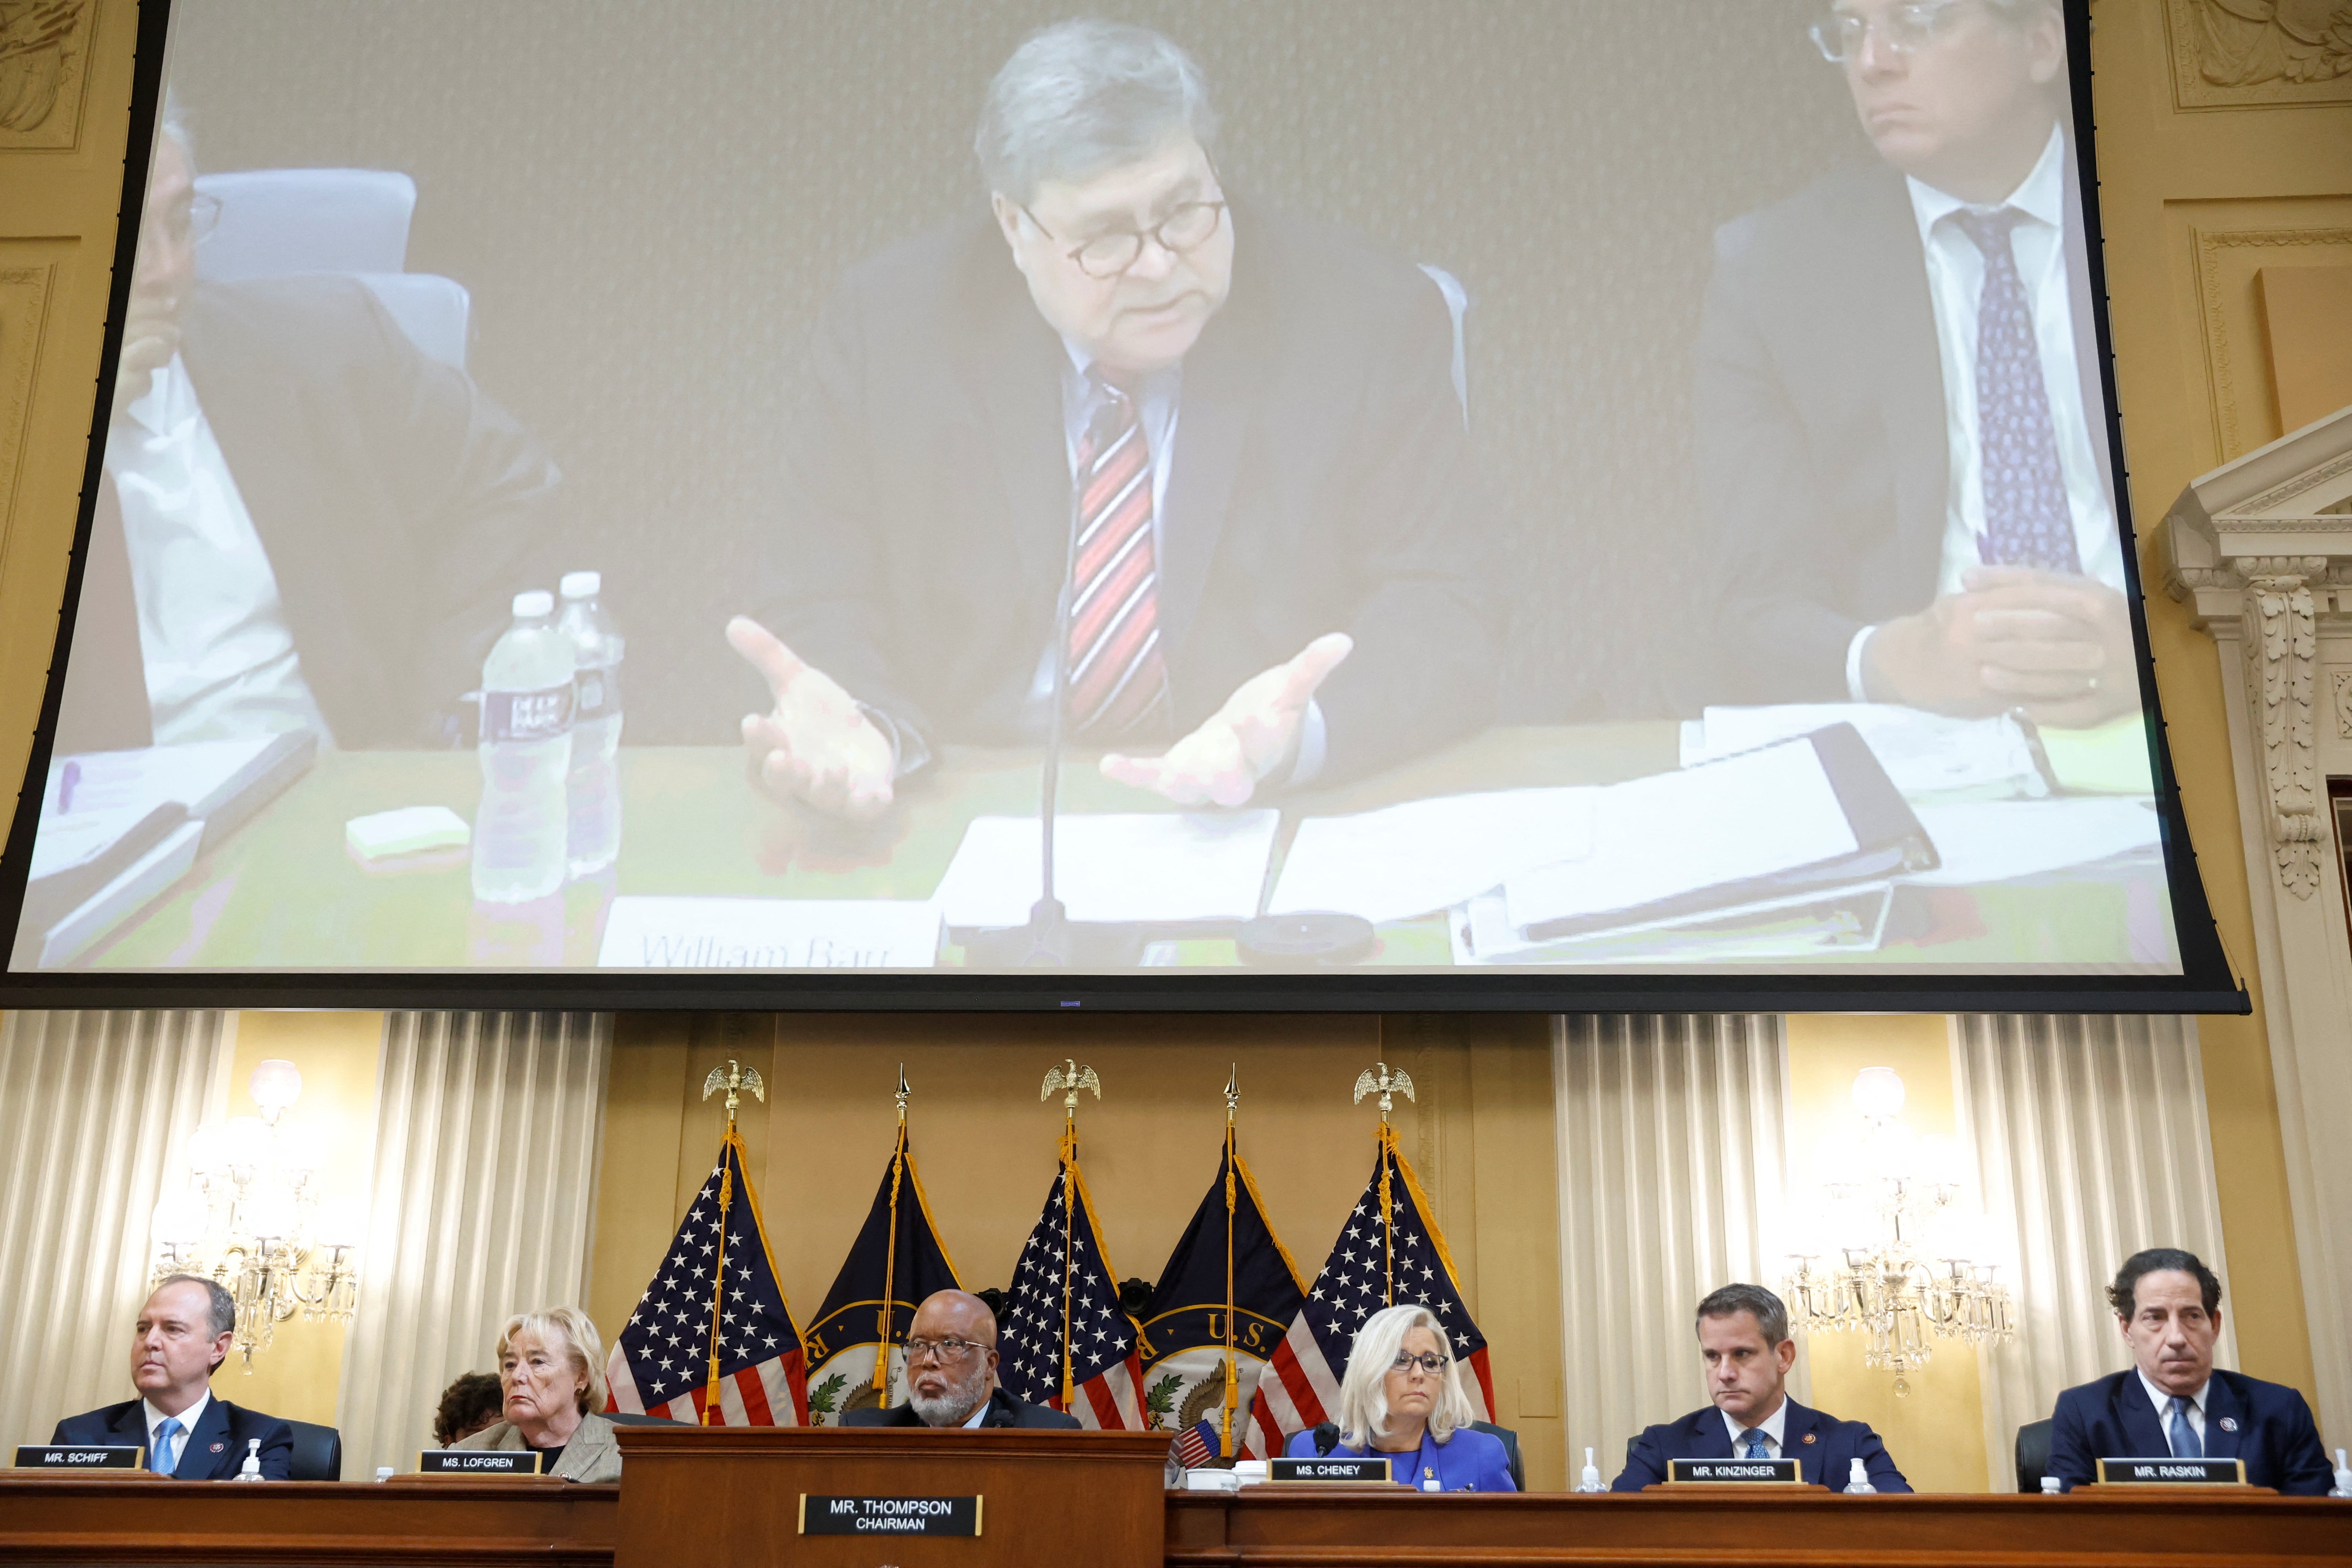 Former US attorney general Bill Barr is seen on video during his deposition presented by the House panel on 9 June